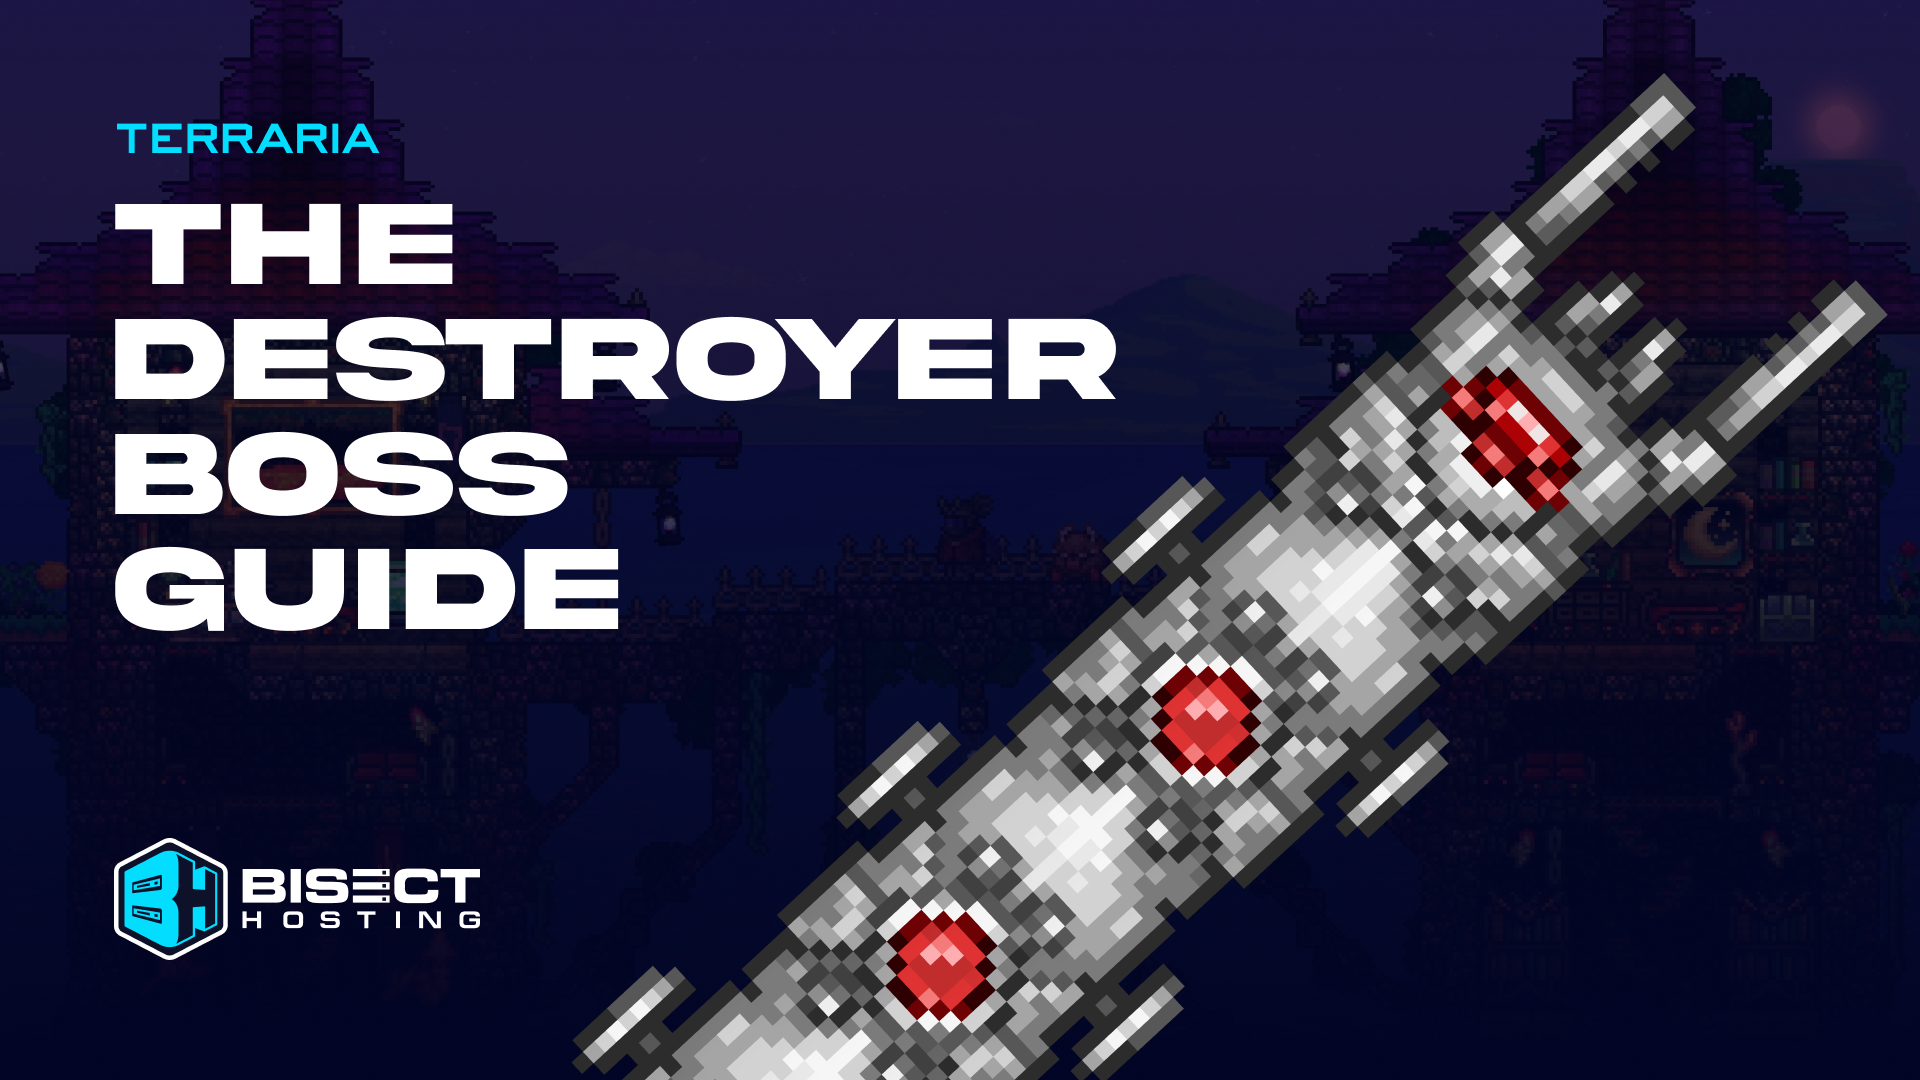 Terraria The Destroyer Boss Guide: How to Summon, Attacks, & Loot Table